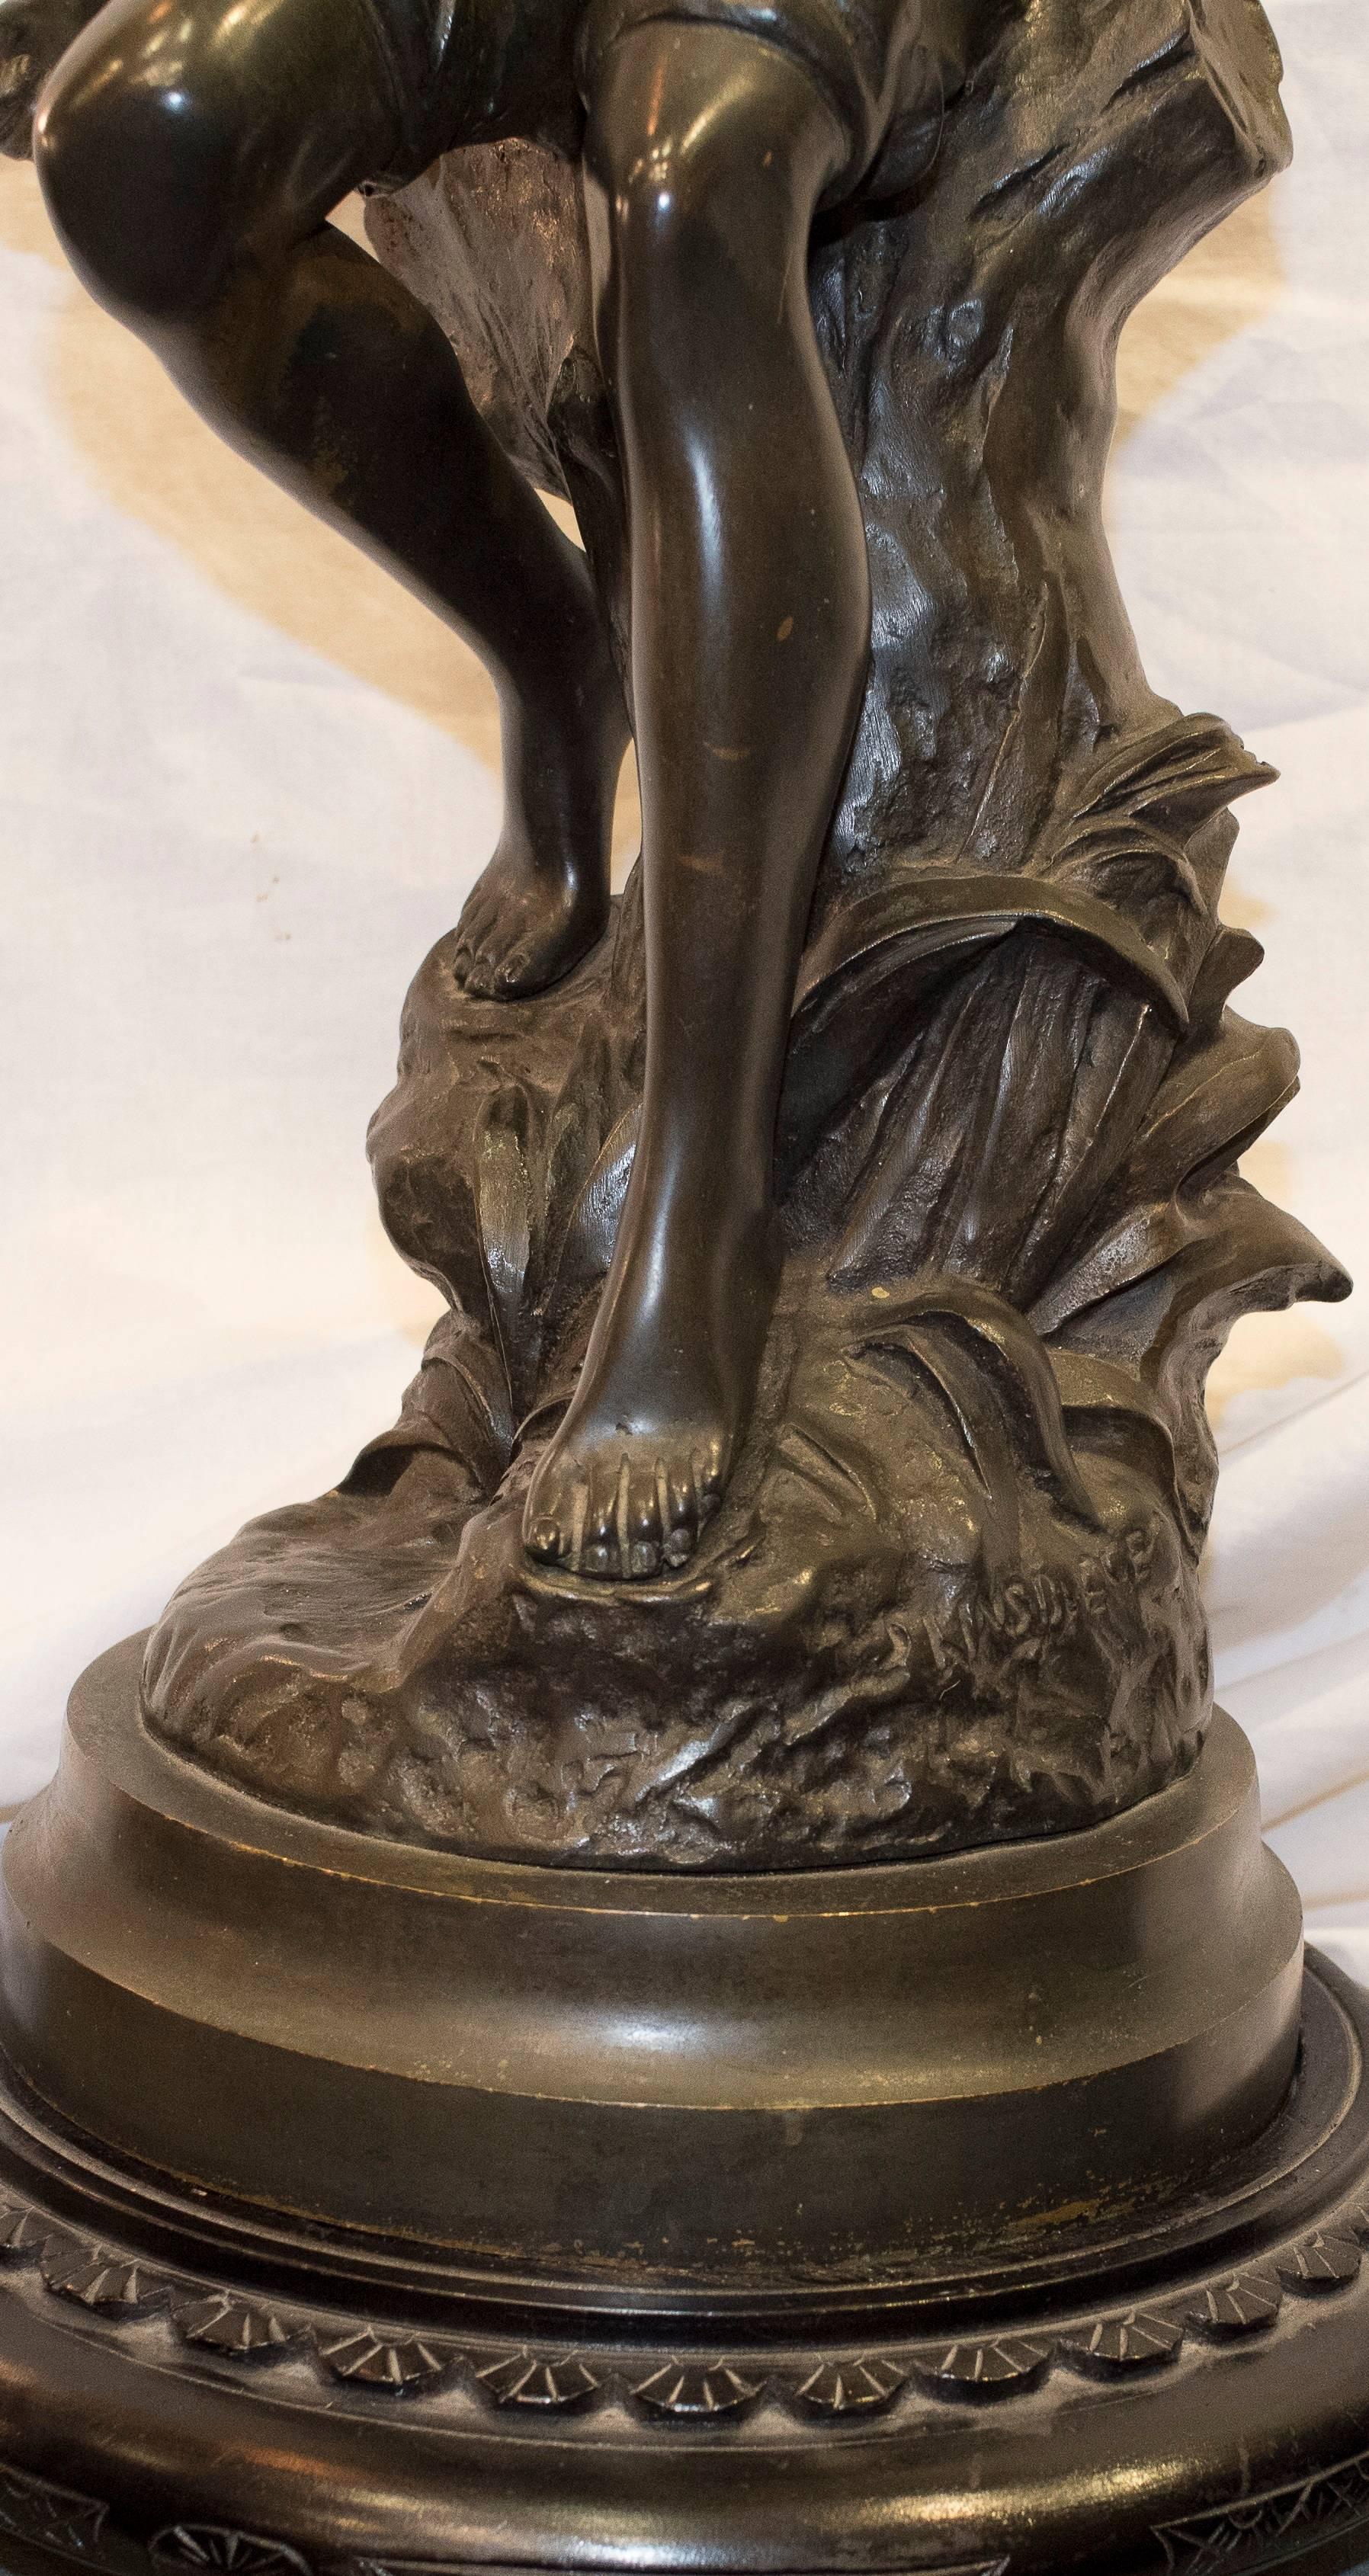 One of a kind 19th century French sculpture in blued bronze, is a young fisherman. Signed.